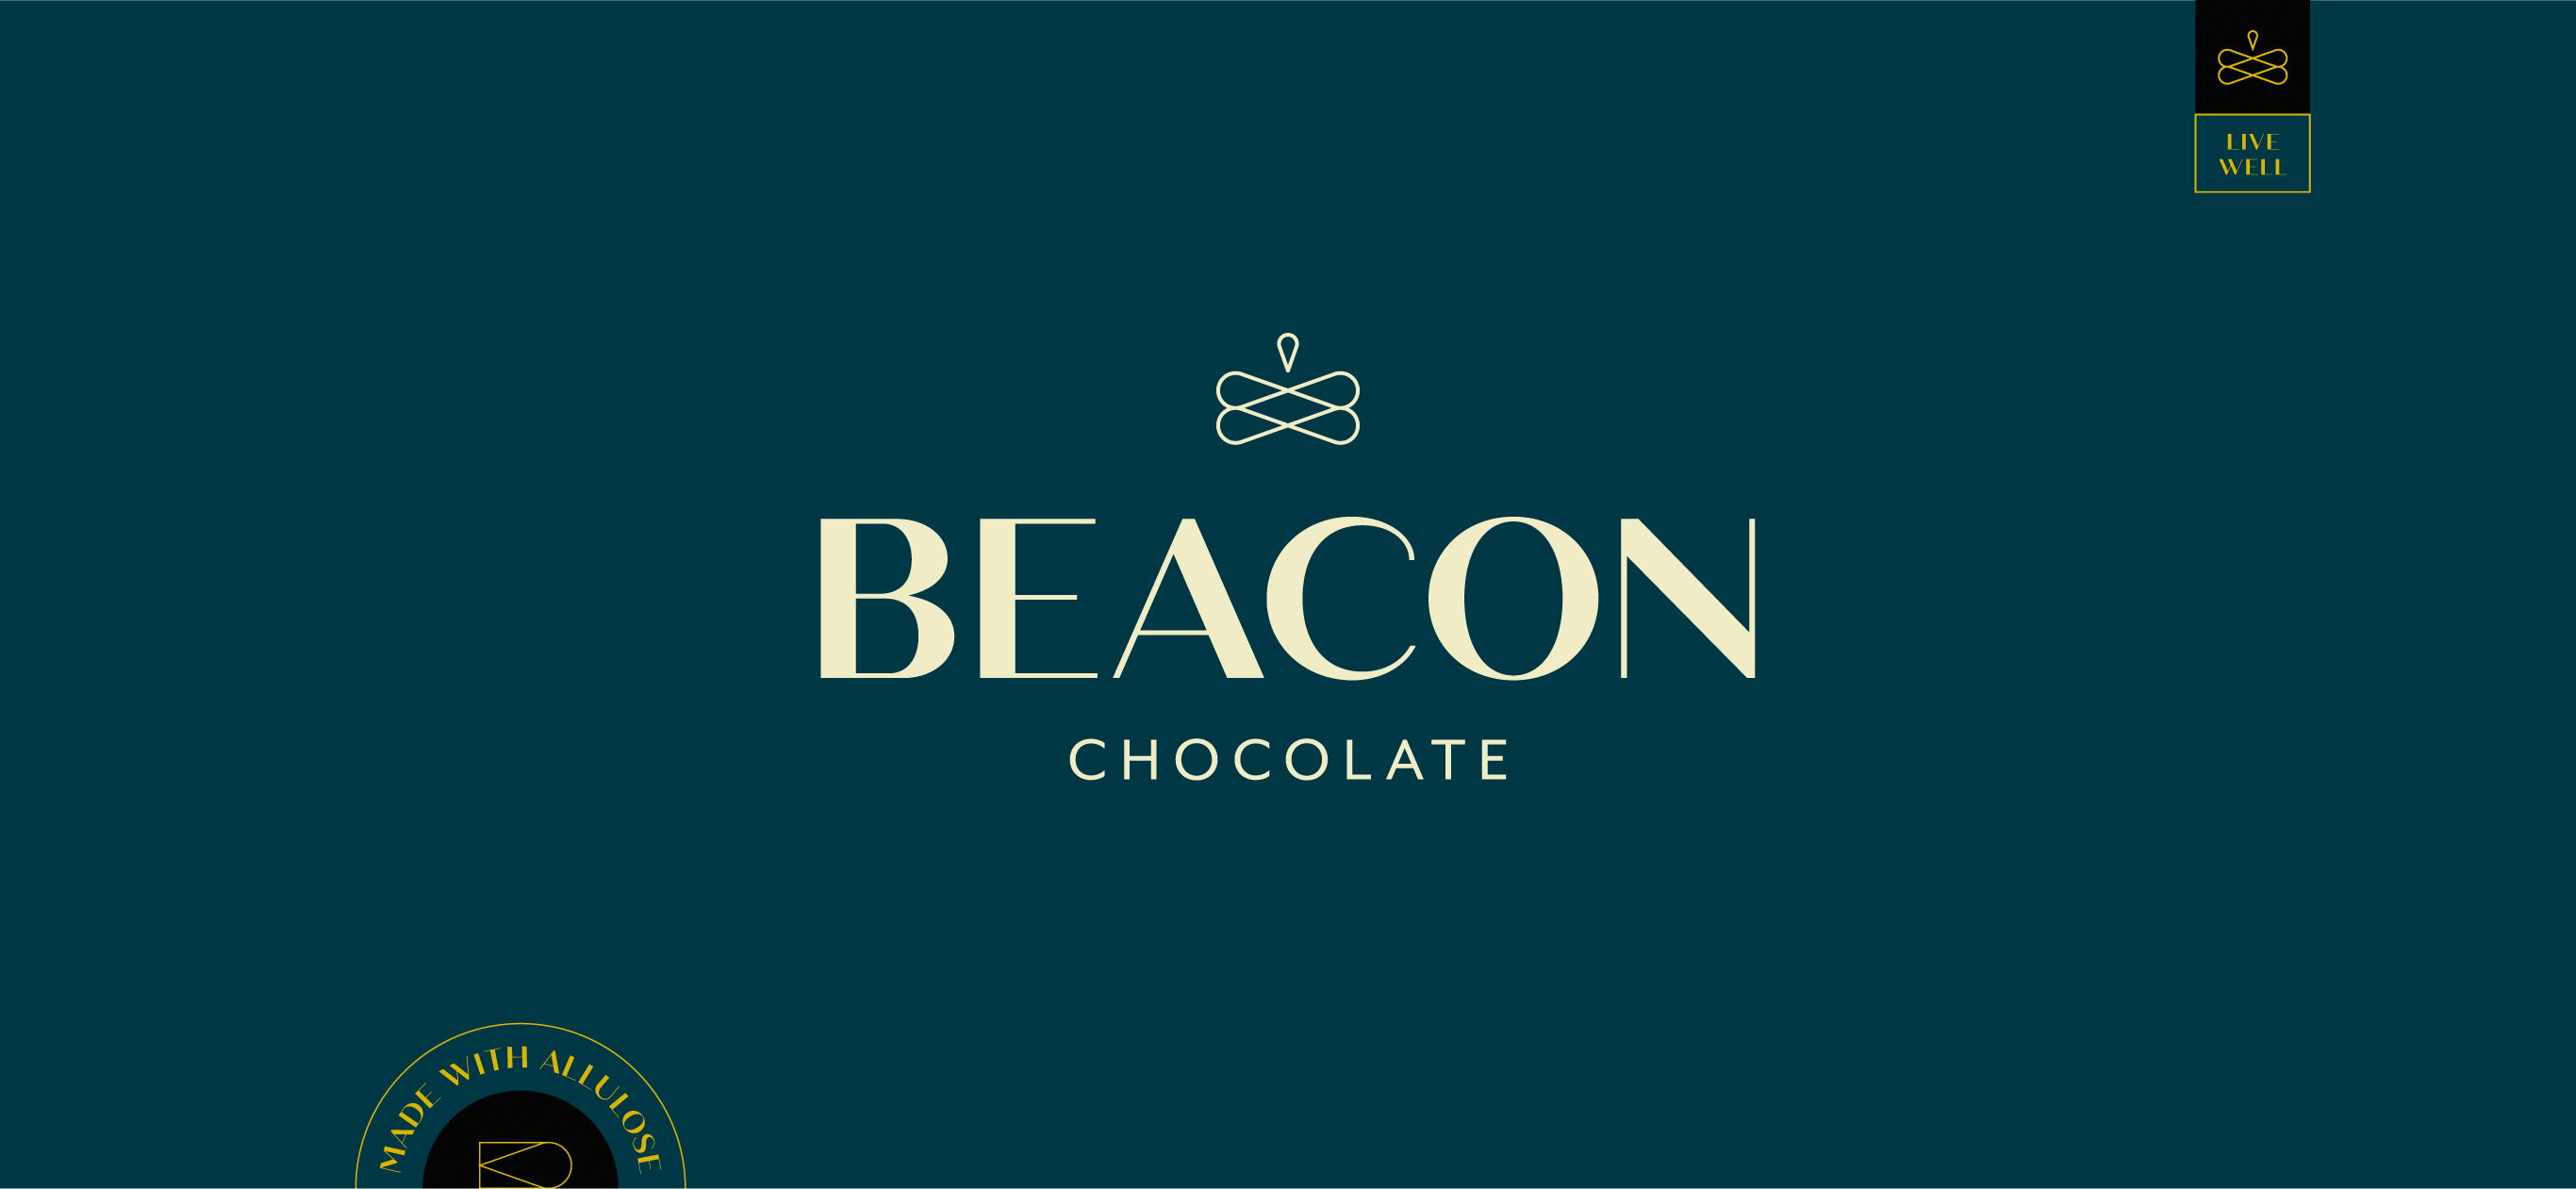 Beacon Chocolate Identity and Packaging—01@2x